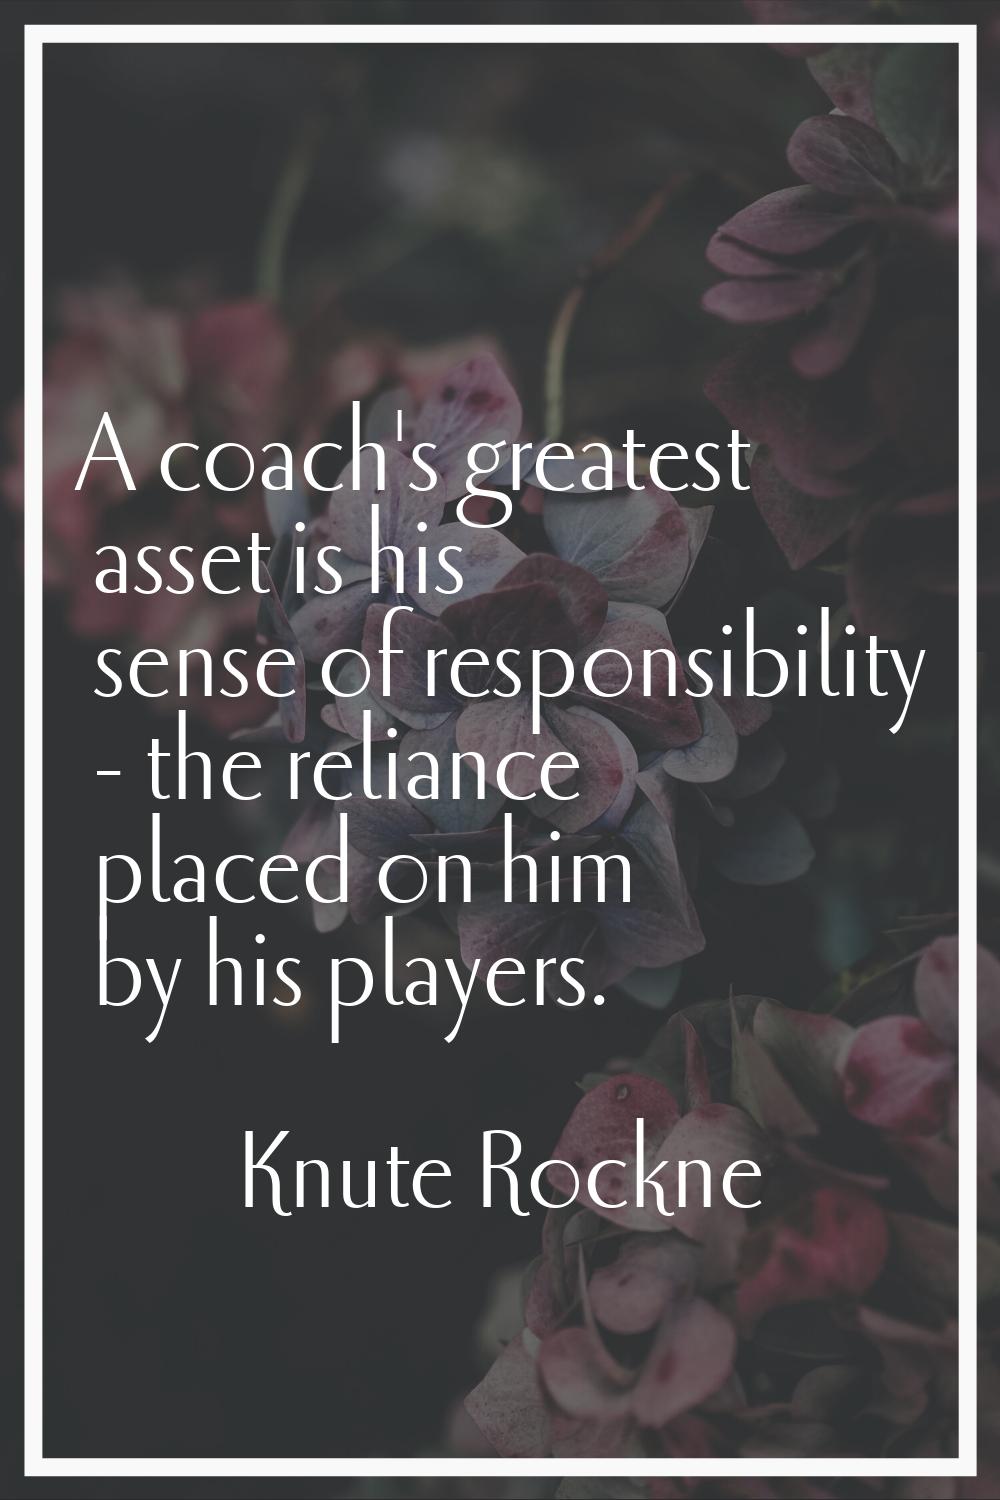 A coach's greatest asset is his sense of responsibility - the reliance placed on him by his players